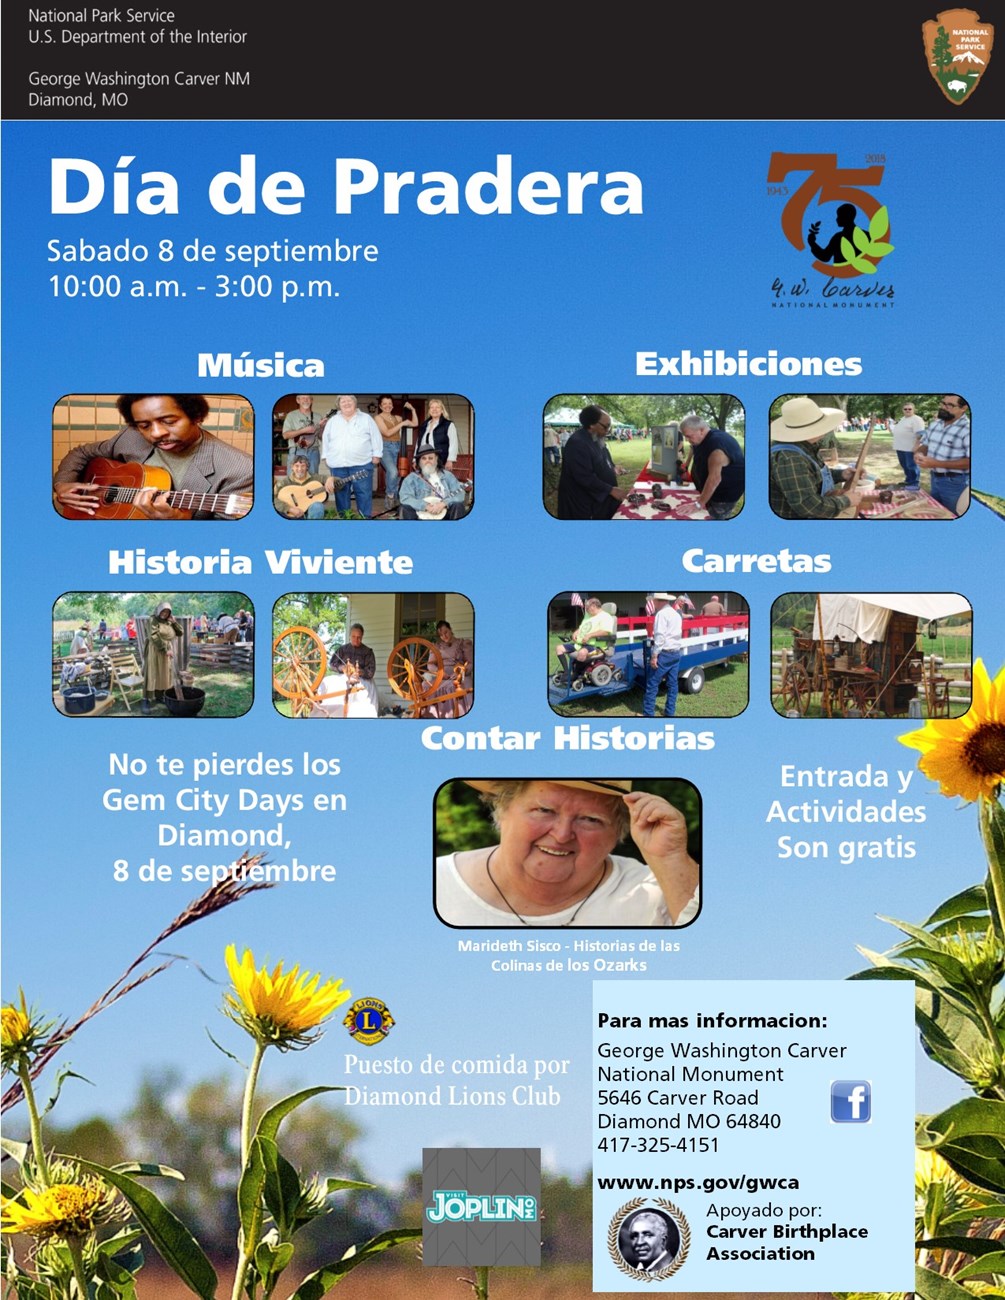 The photograph is for an upcoming special event called Prairie Day. The poster has been translated in Spanish.